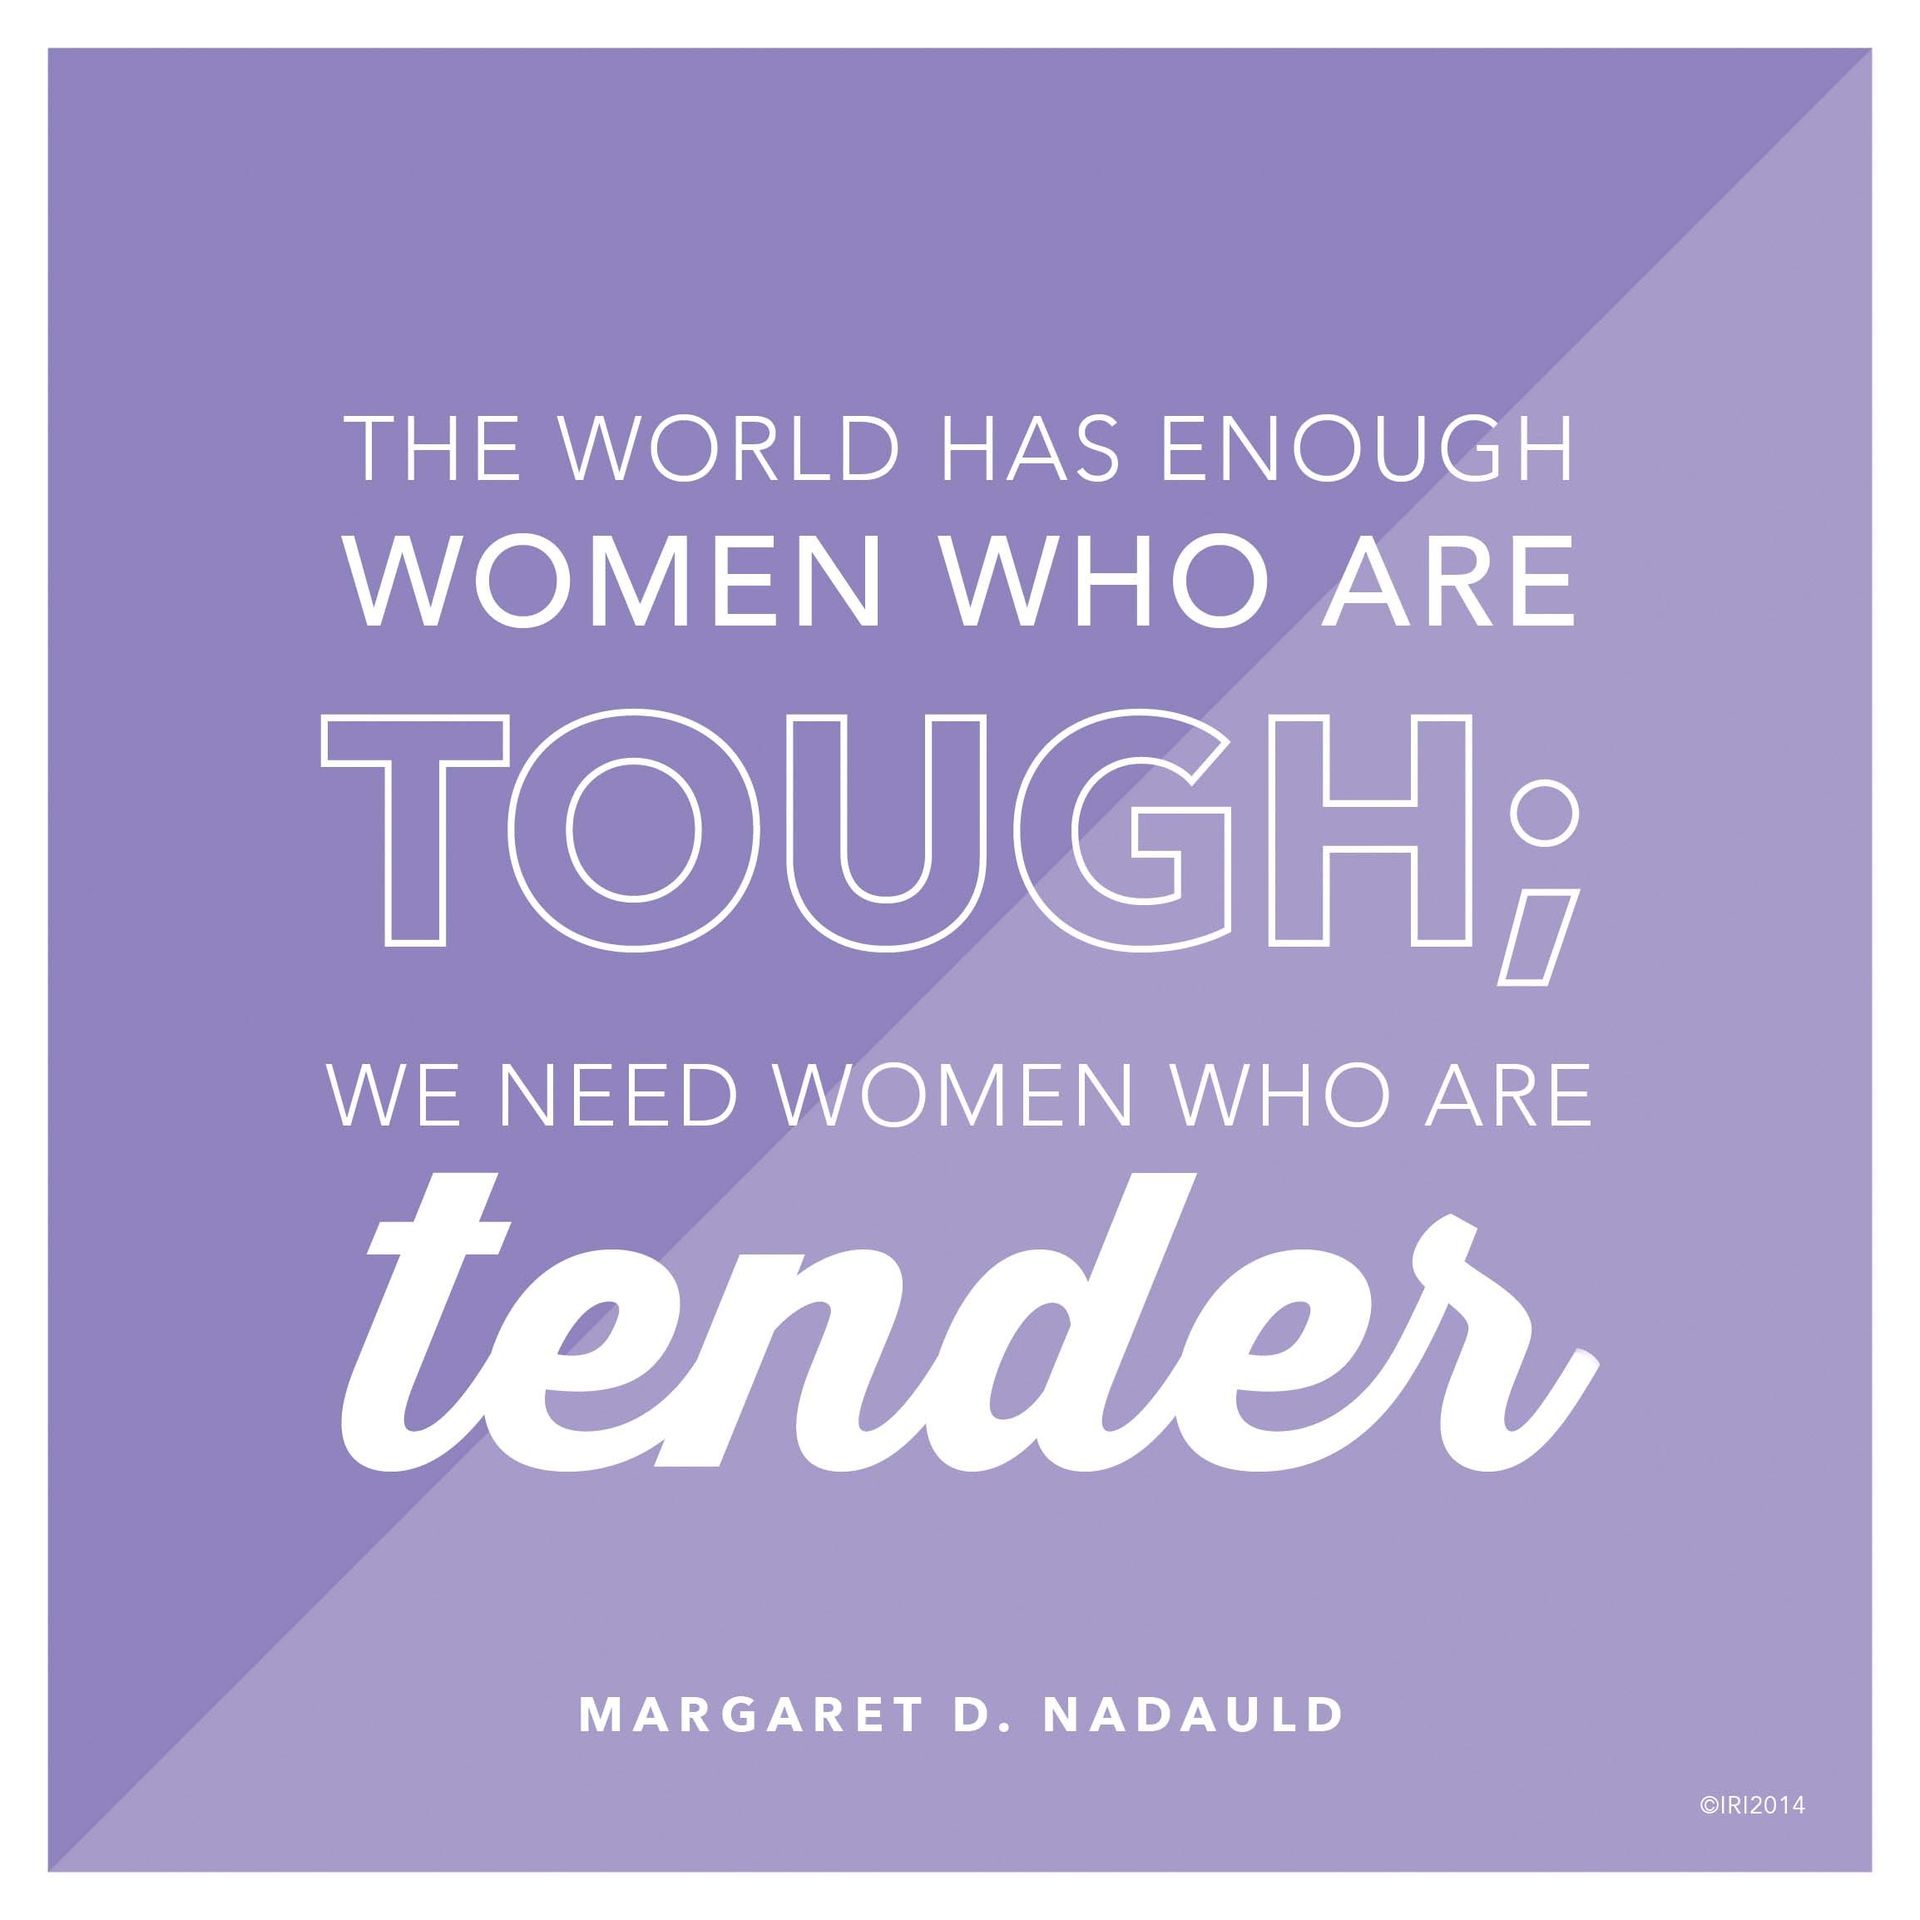 “The world has enough women who are tough; we need women who are tender.”—Sister Margaret D. Nadauld, “The Joy of Womanhood”